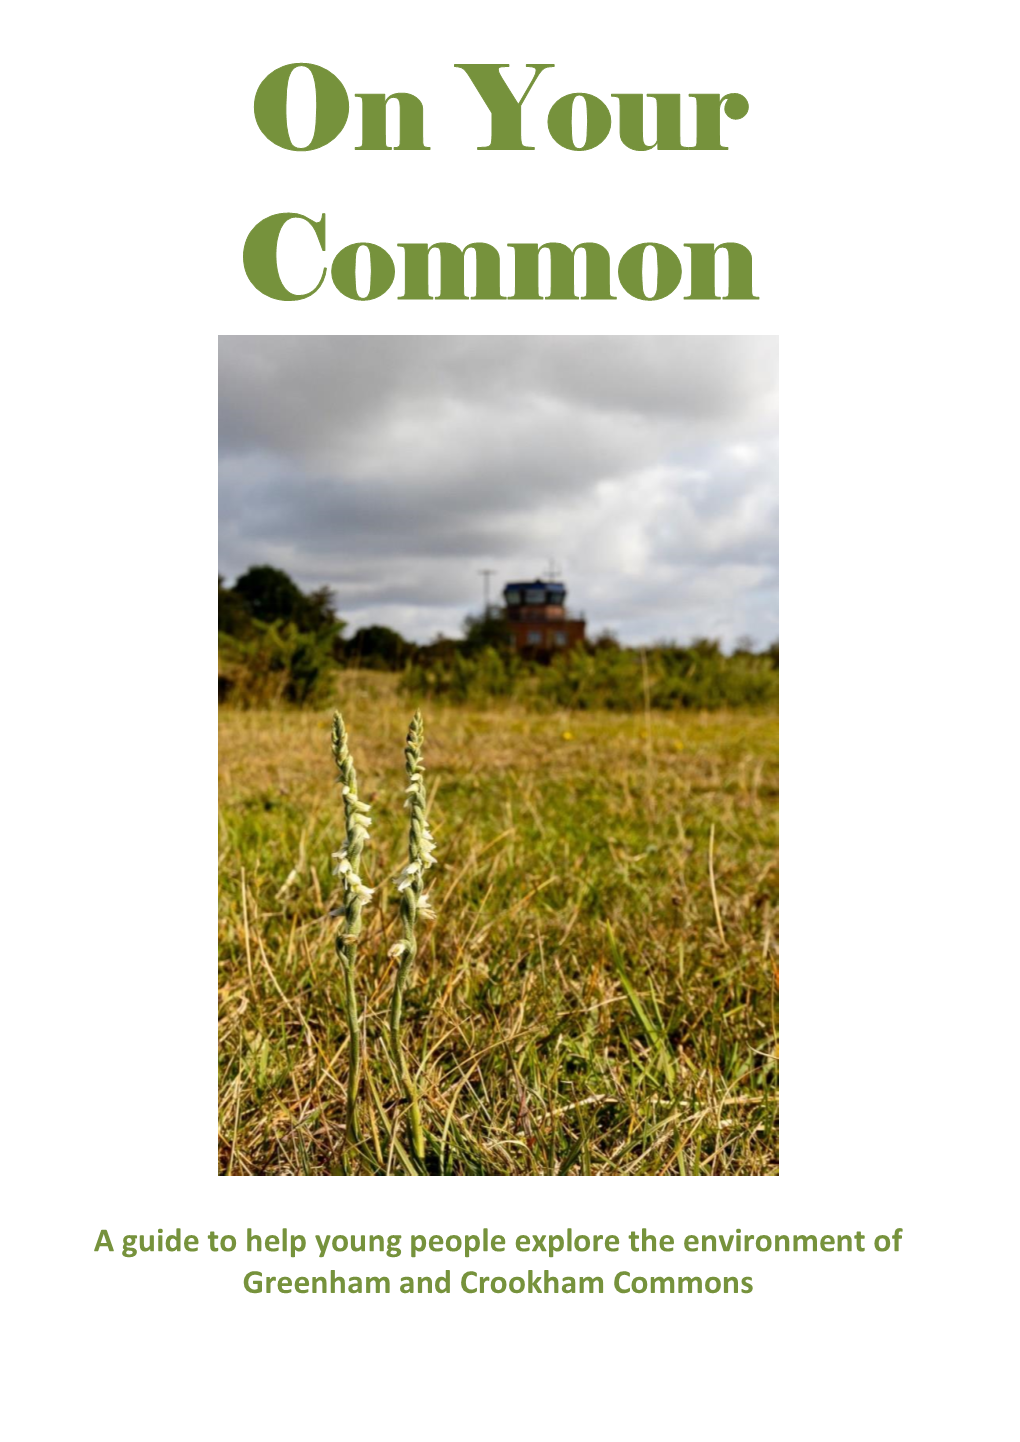 On Your Common